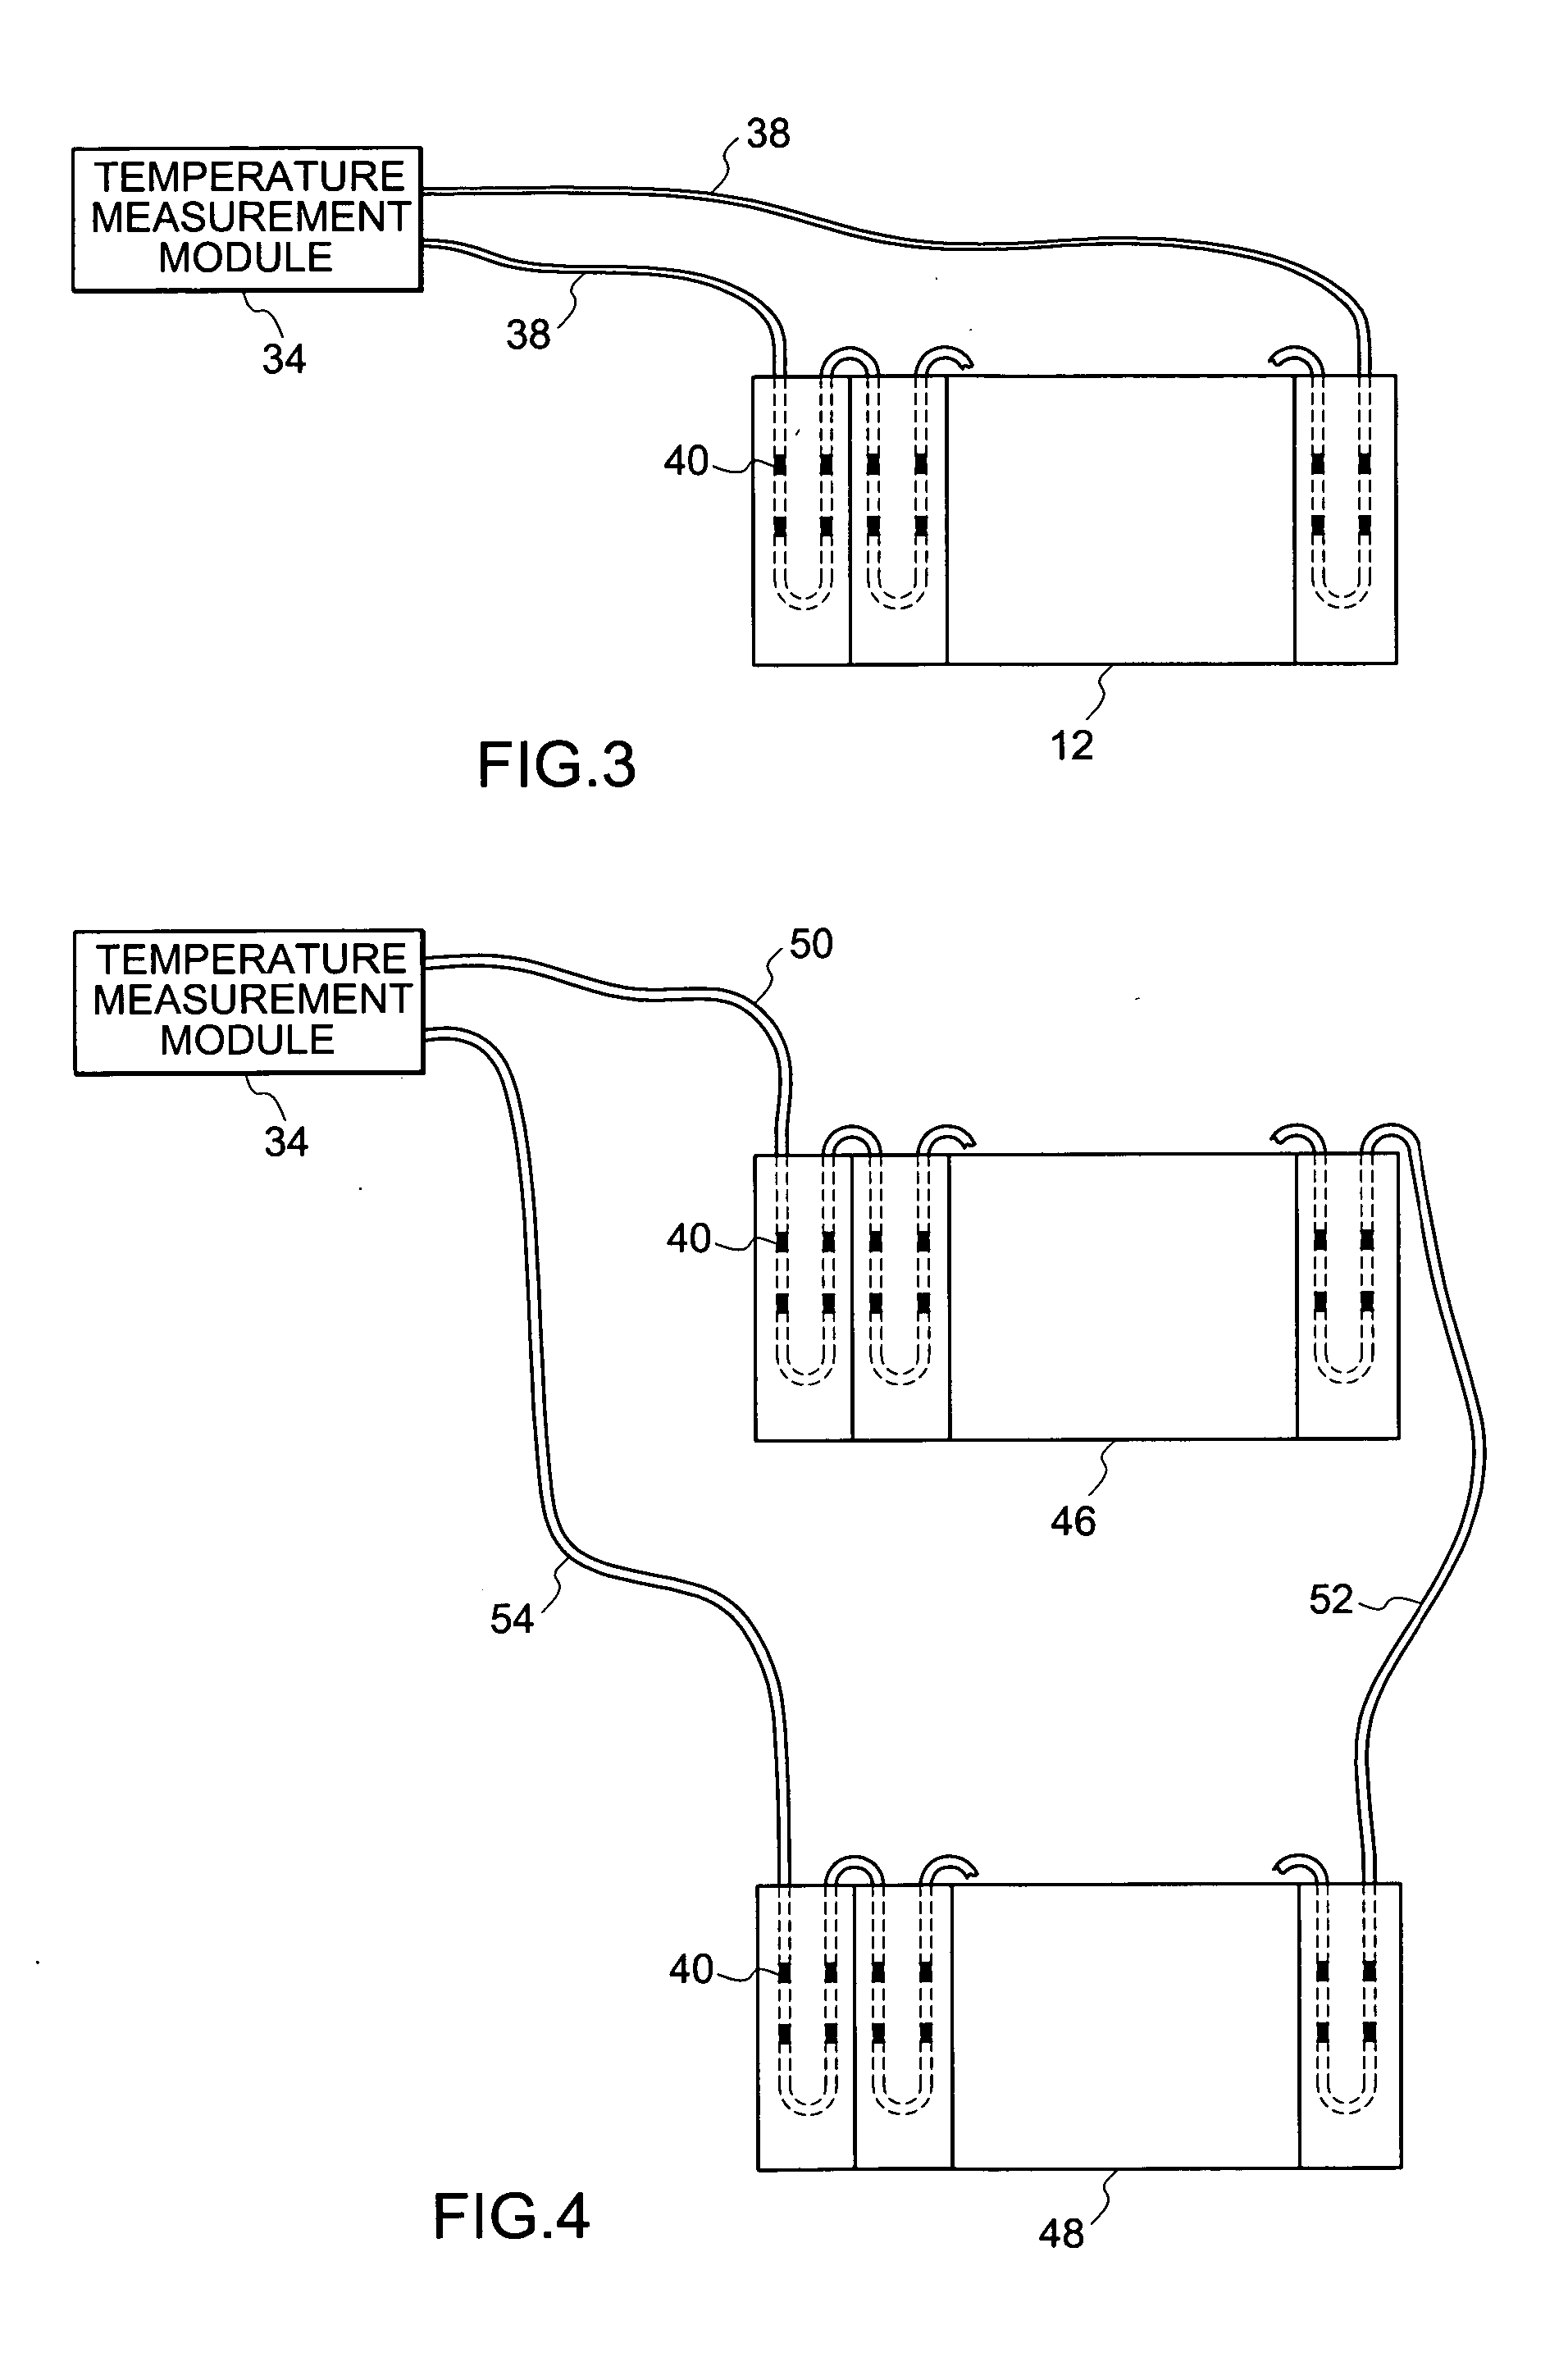 Optical battery temperature monitoring system and method